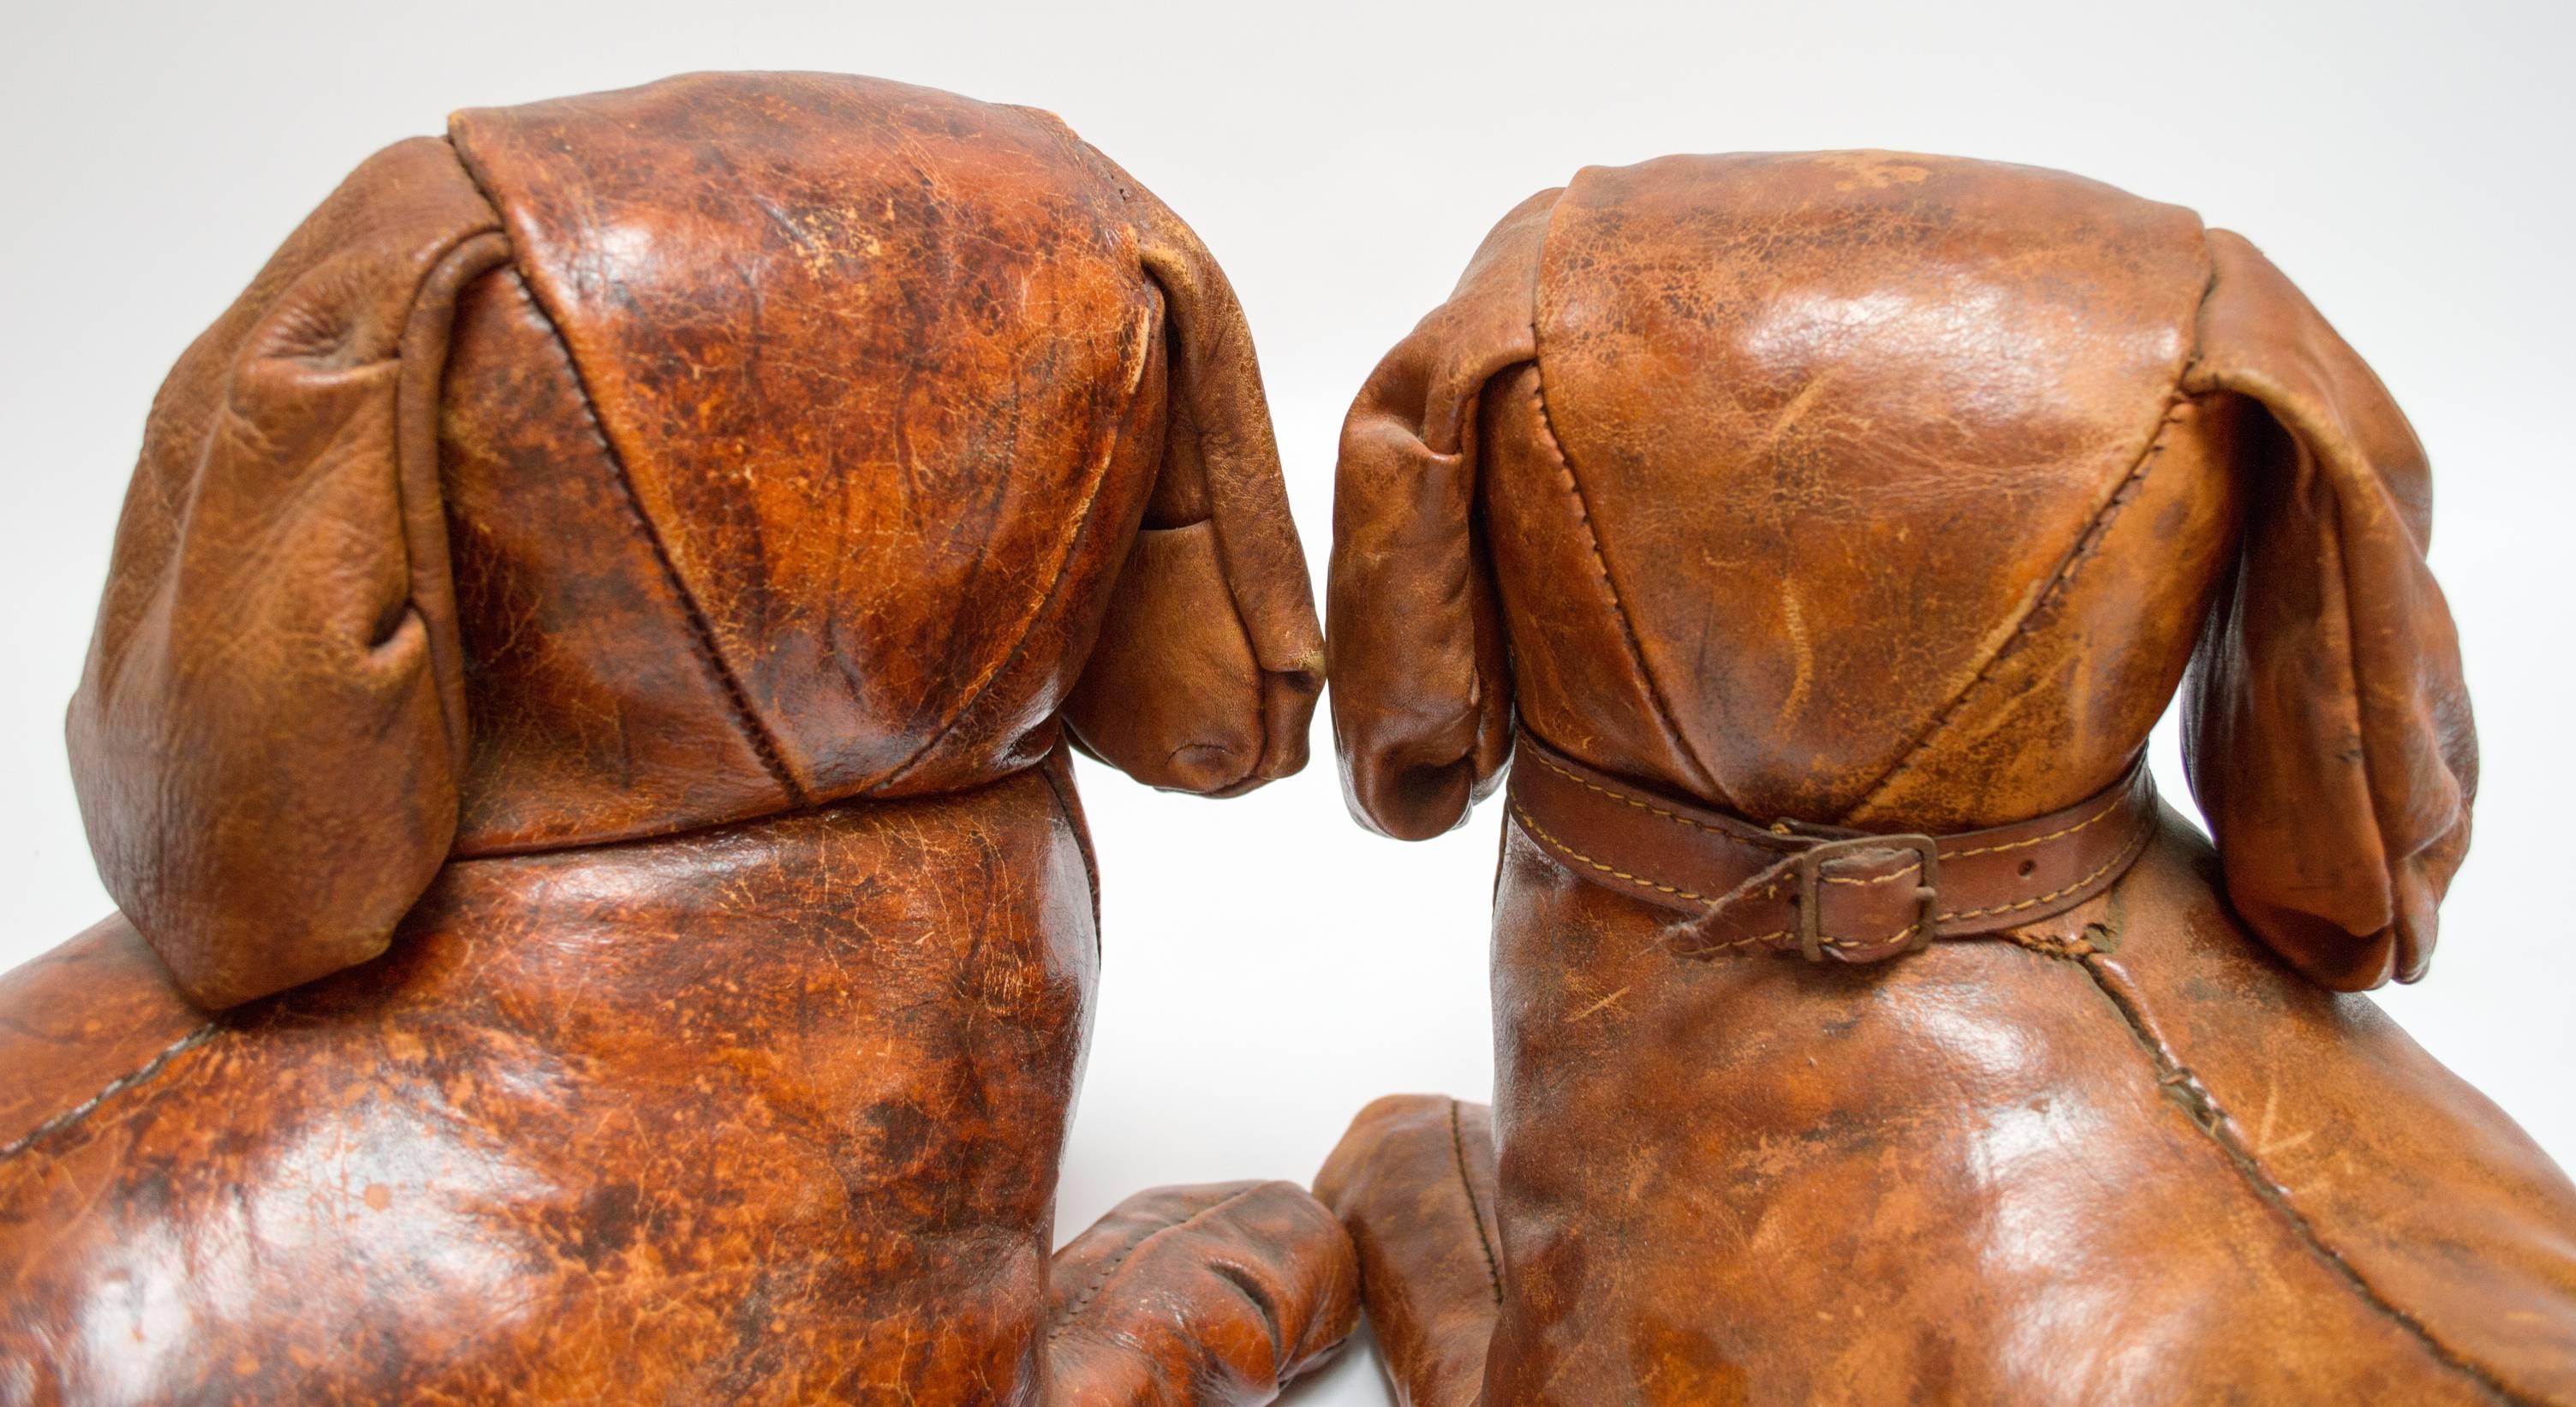 Pair of Leather King Charles Spaniels by Omersa for Abercrombie & Fitch, 1950 For Sale 3